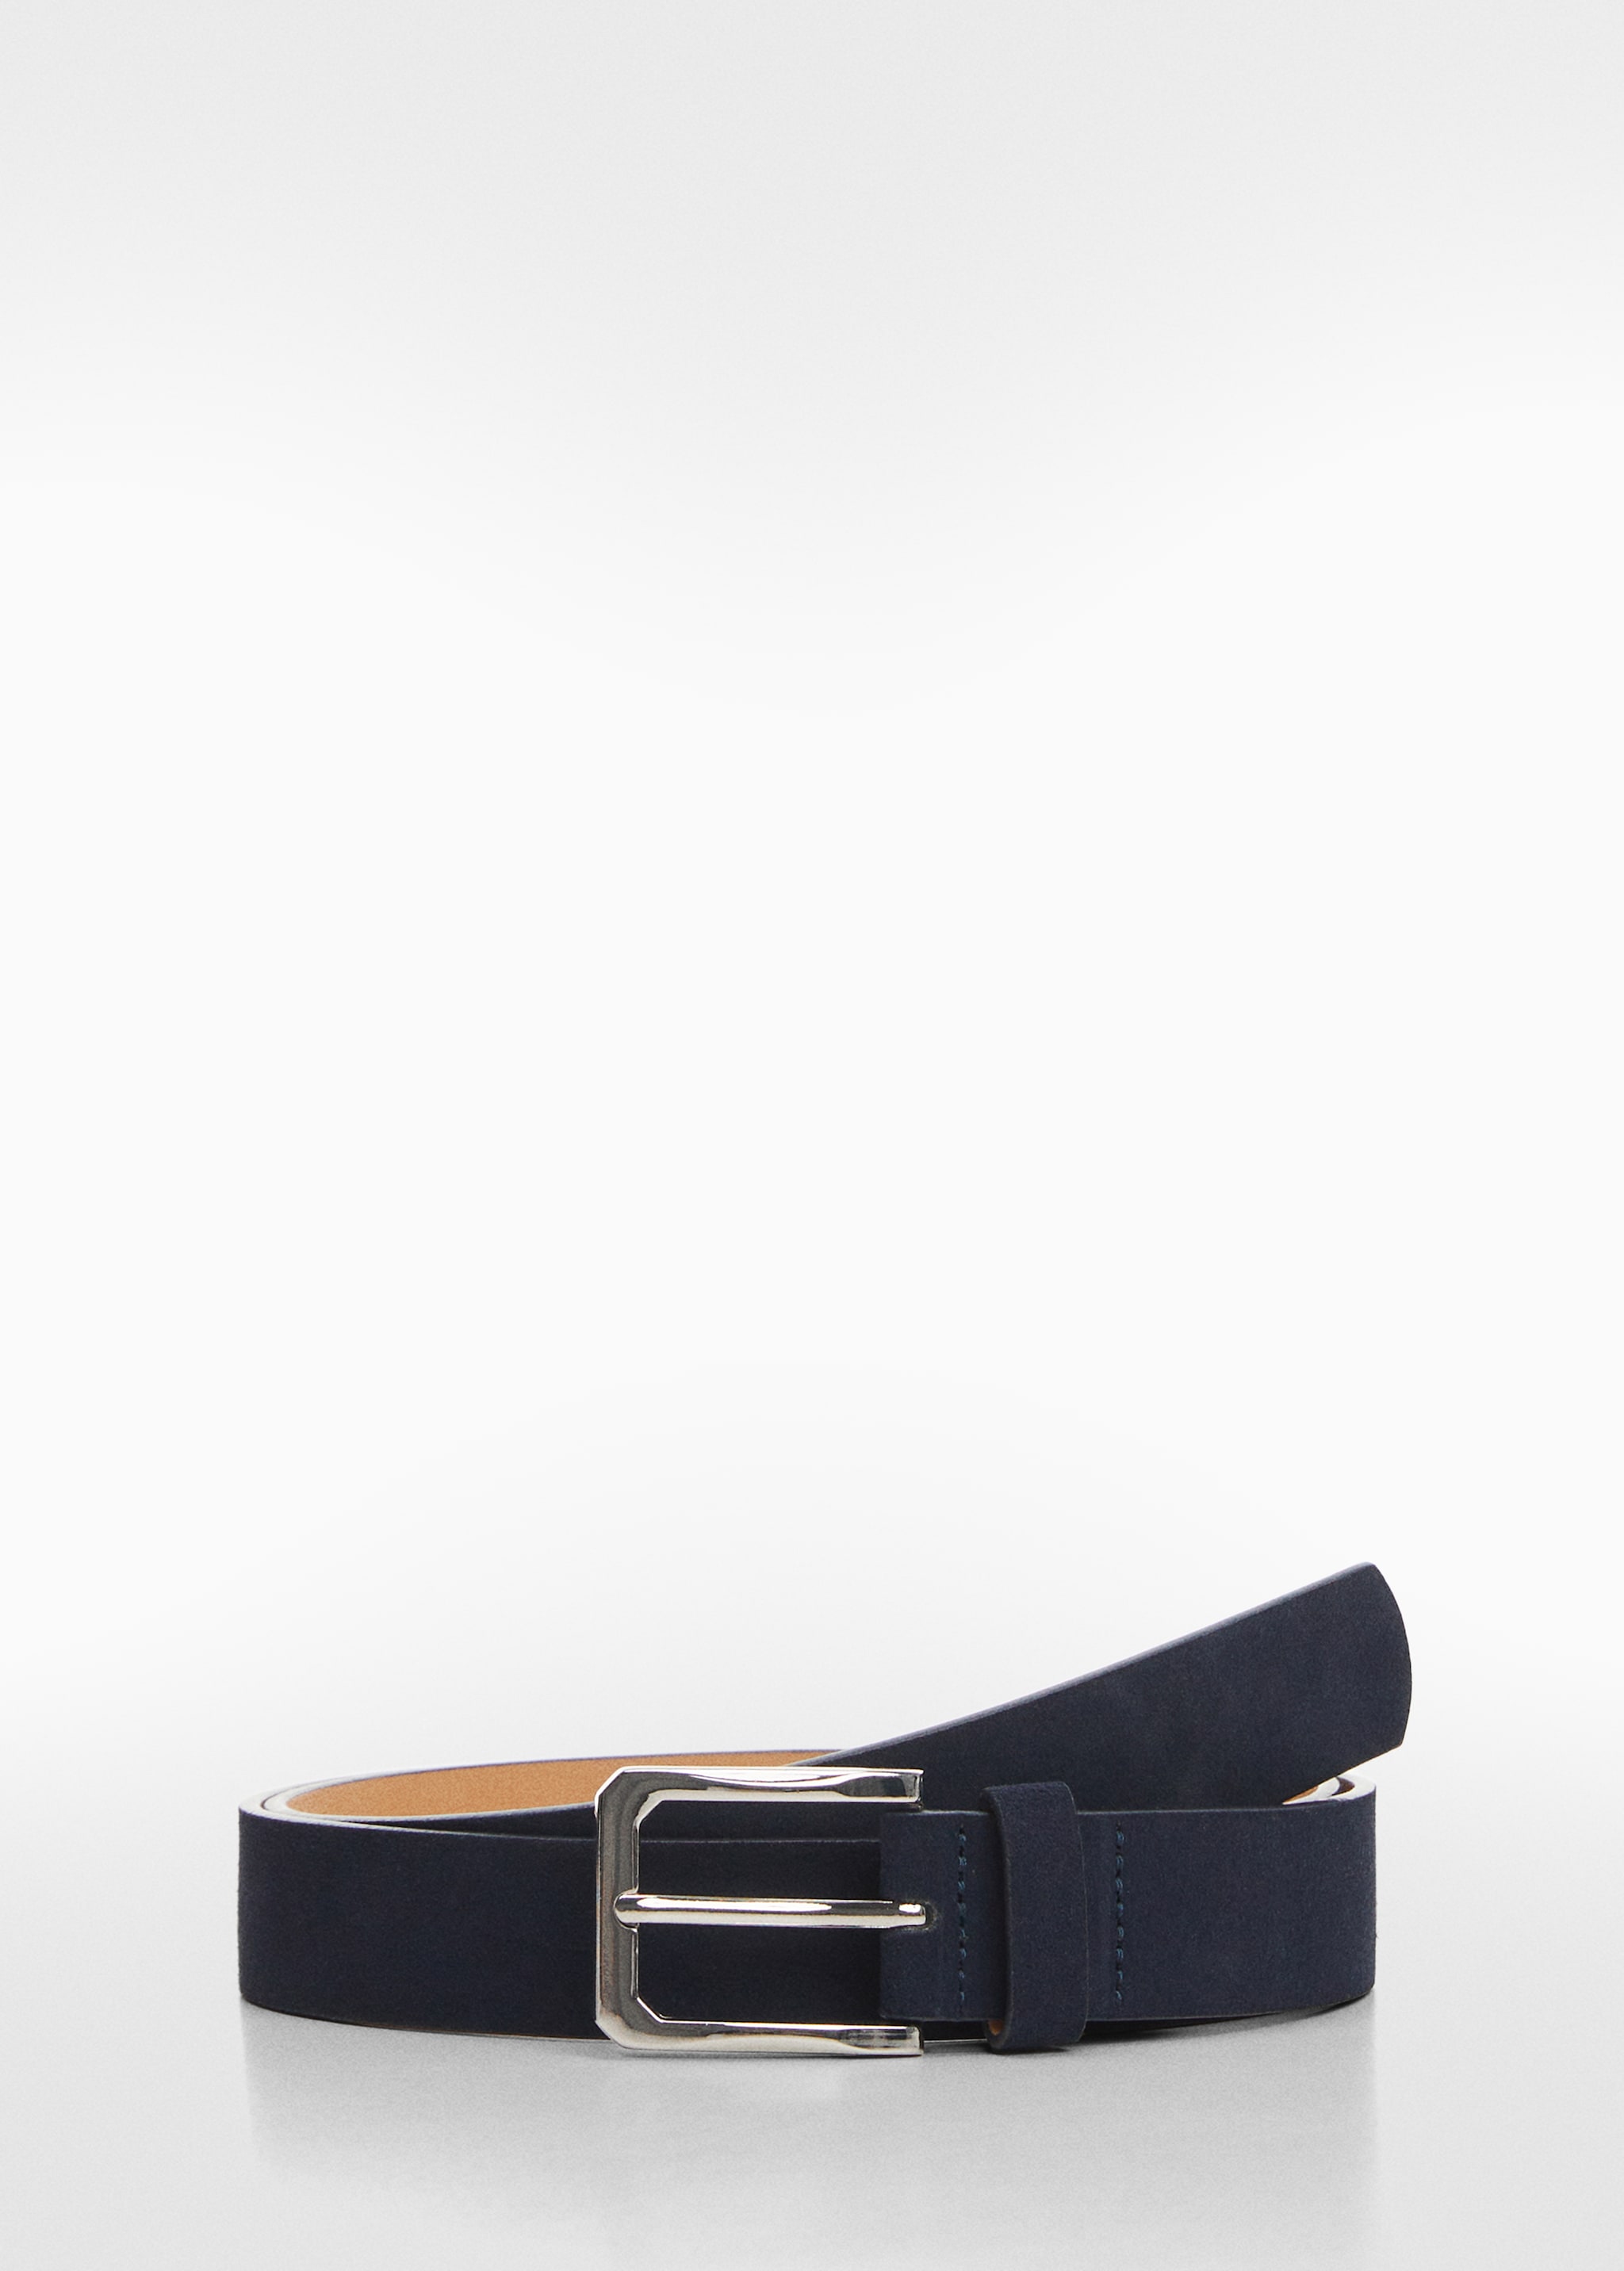 Suede belt - Article without model